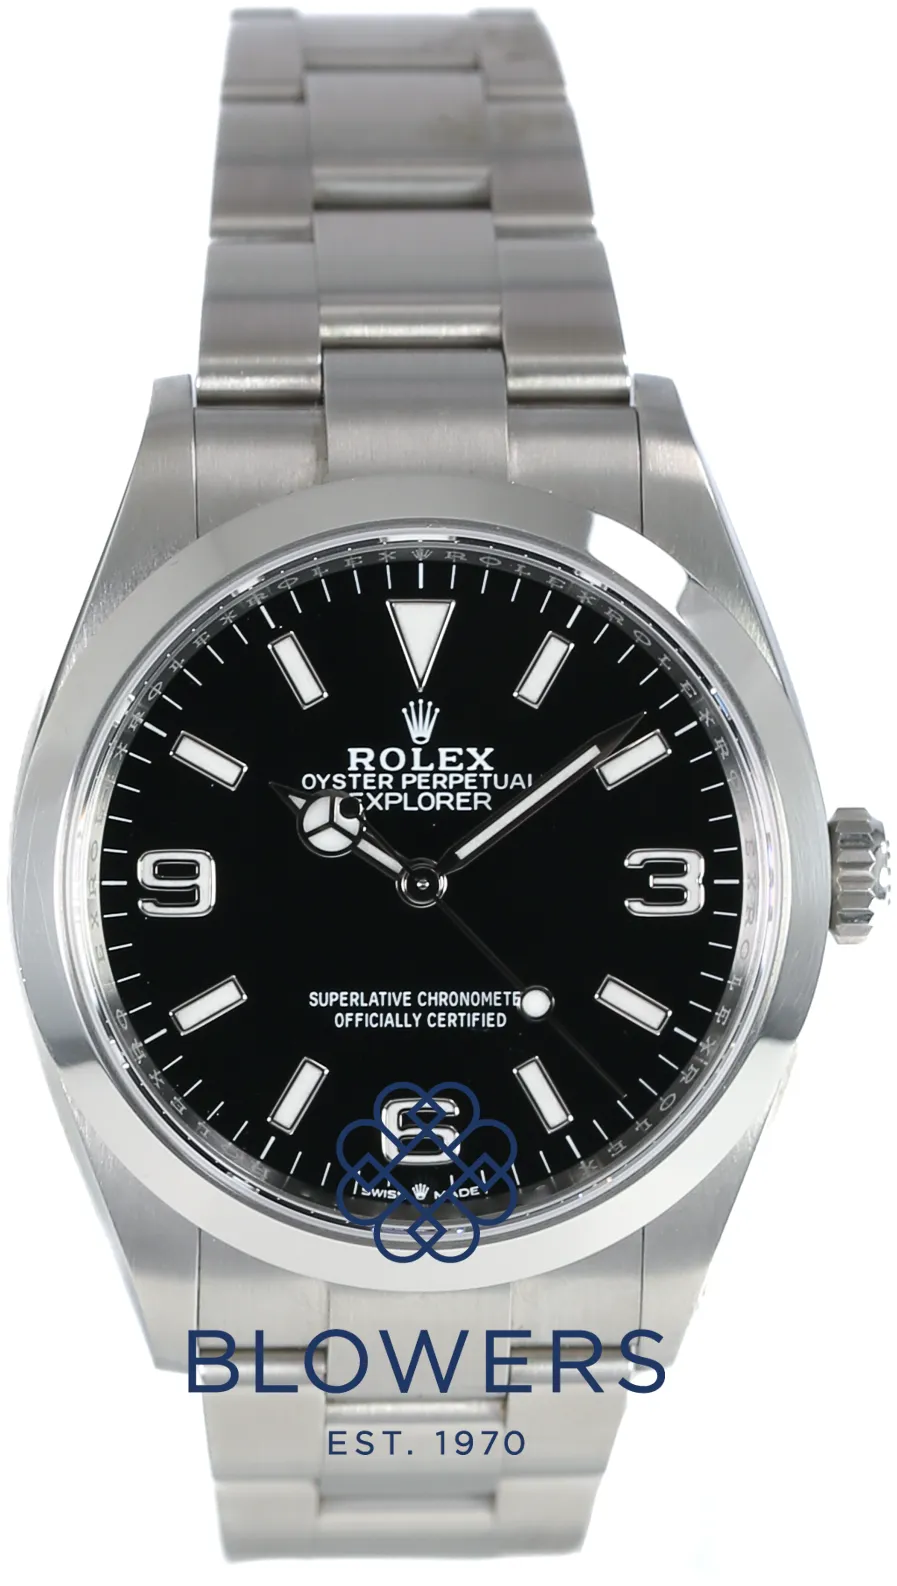 Rolex Oyster Perpetual Explorer 124270 36mm Stainless steel Black